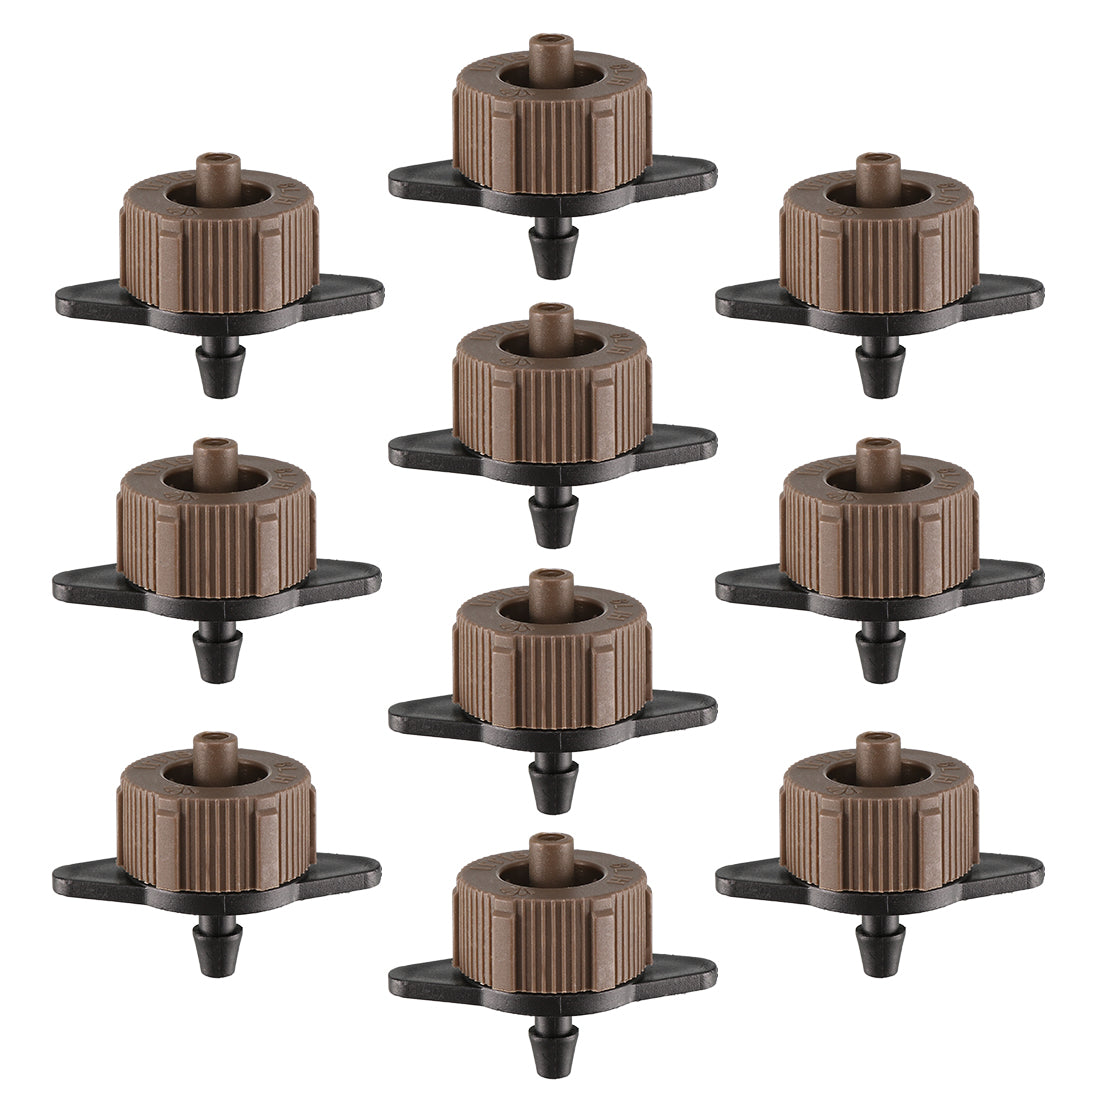 uxcell Uxcell Pressure Compensating Dripper 2 GPH 8L/H Emitter for Garden Lawn Drip Irrigation with Barbed Hose Connector, Plastic Black Brown 25pcs